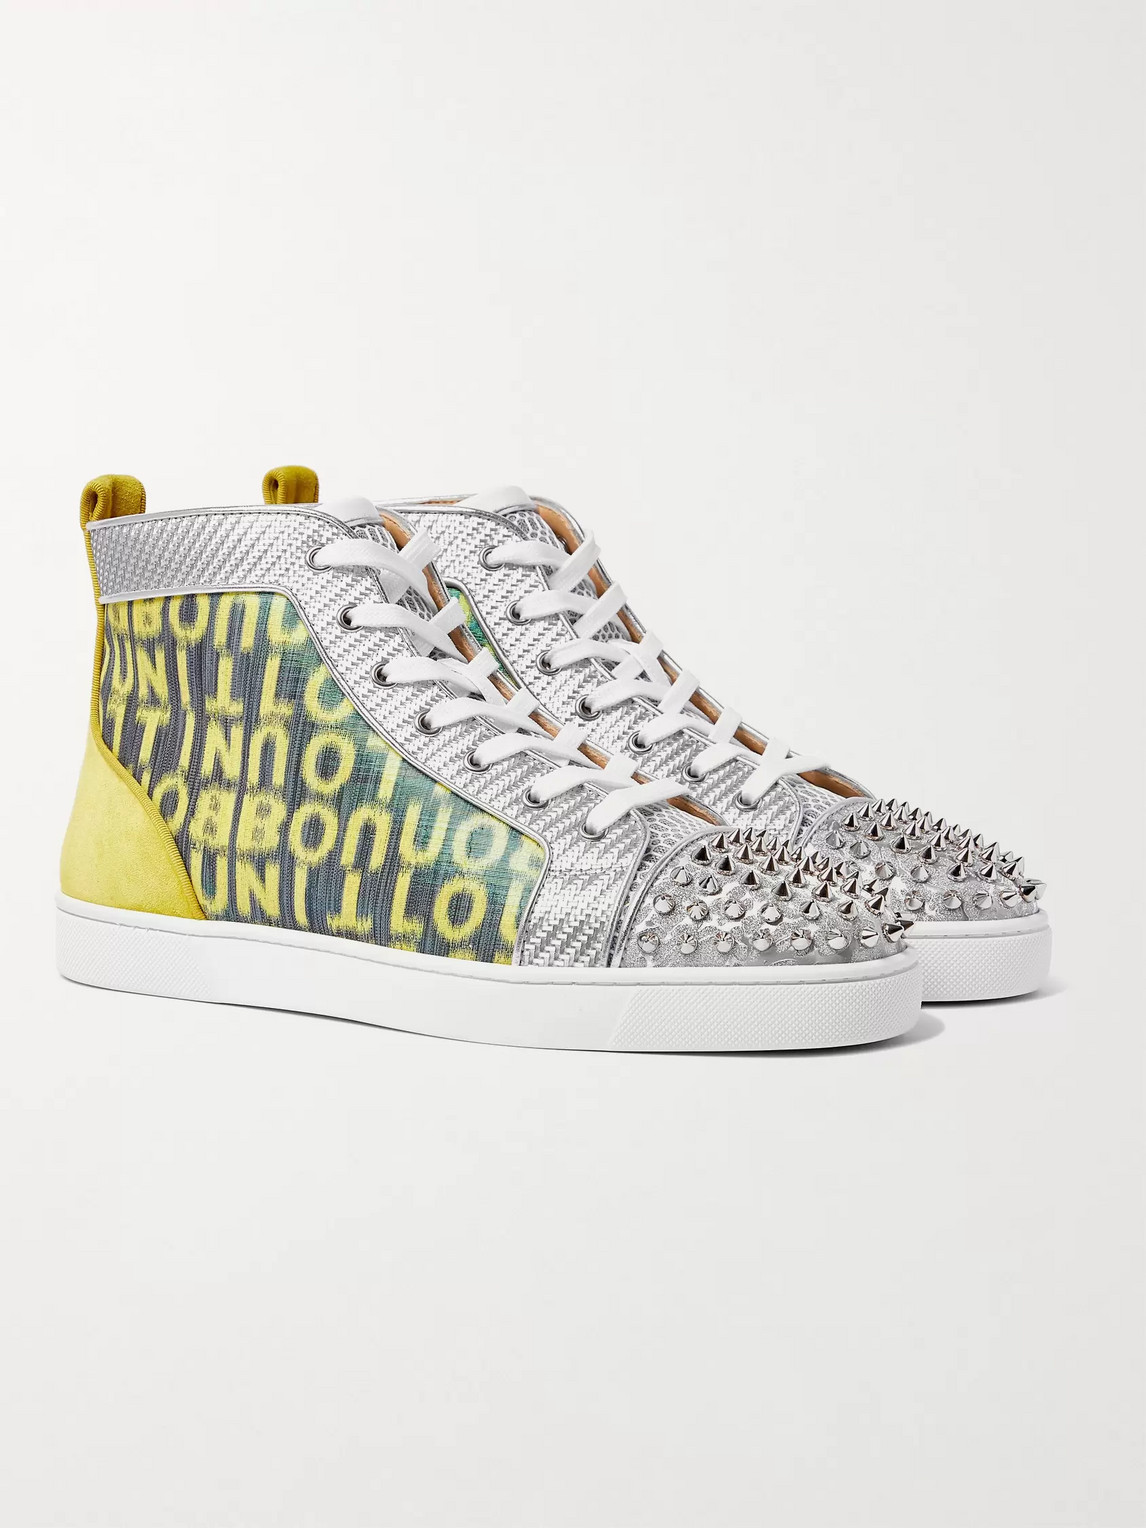 CHRISTIAN LOUBOUTIN LOUIS SPIKED SUEDE AND MESH-TRIMMED GLITTERED LOGO-PRINT CANVAS HIGH-TOP SNEAKERS